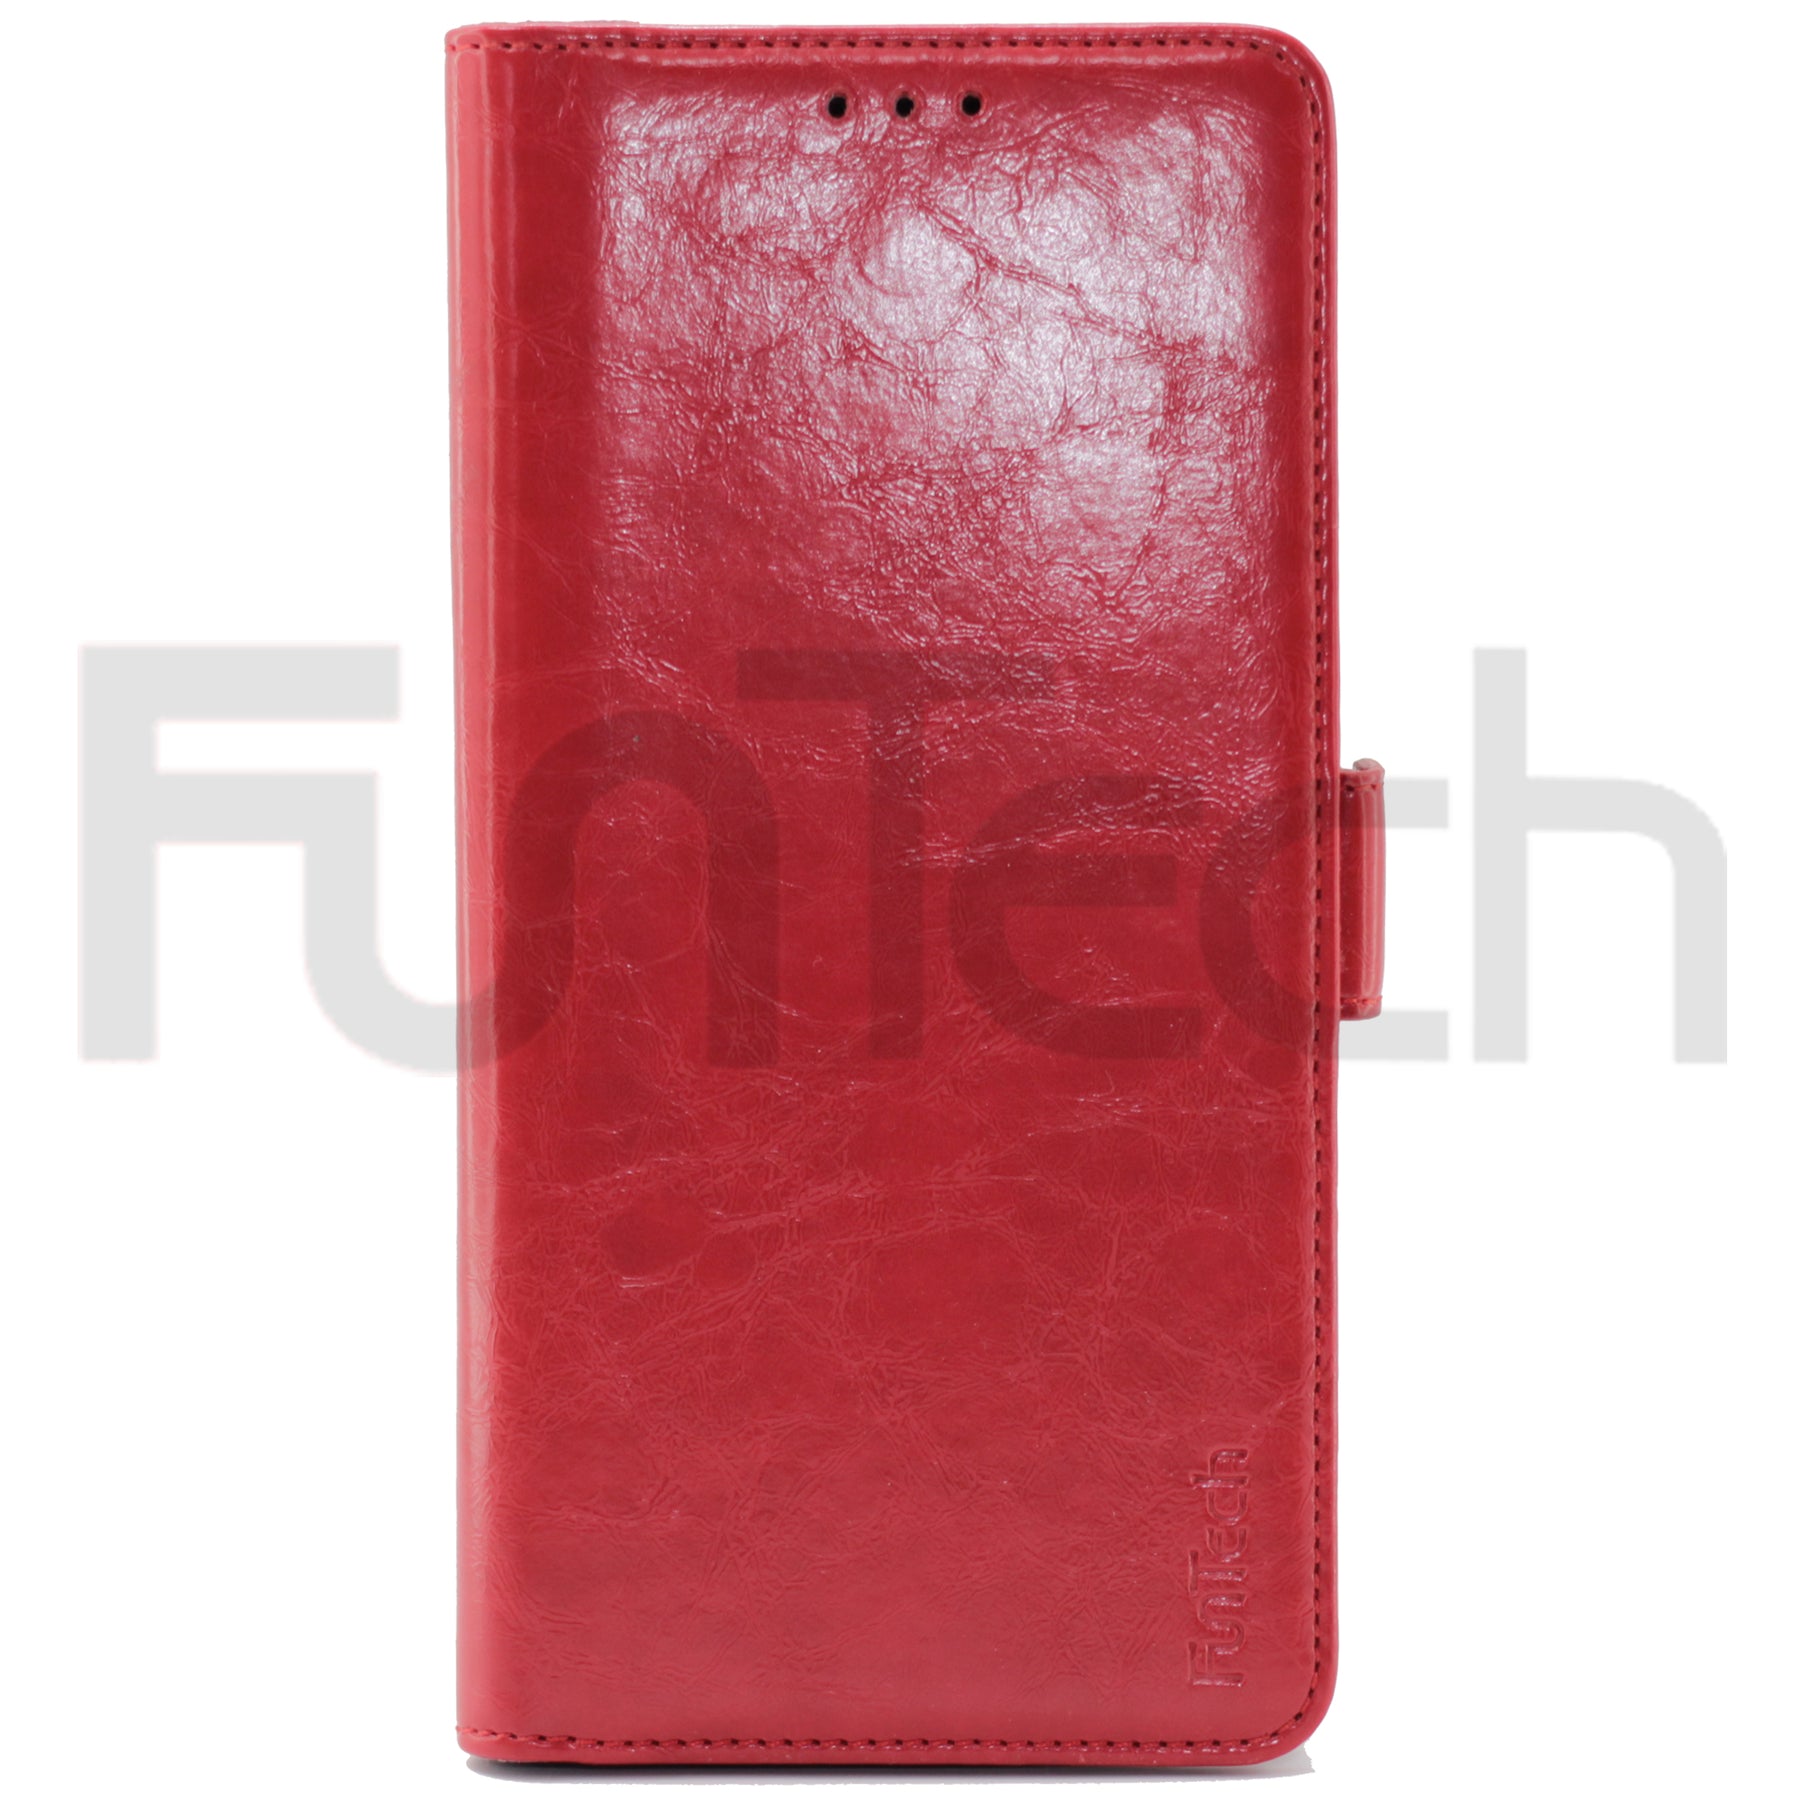 Samsung A9 2018, Leather Wallet Case, Color Red.